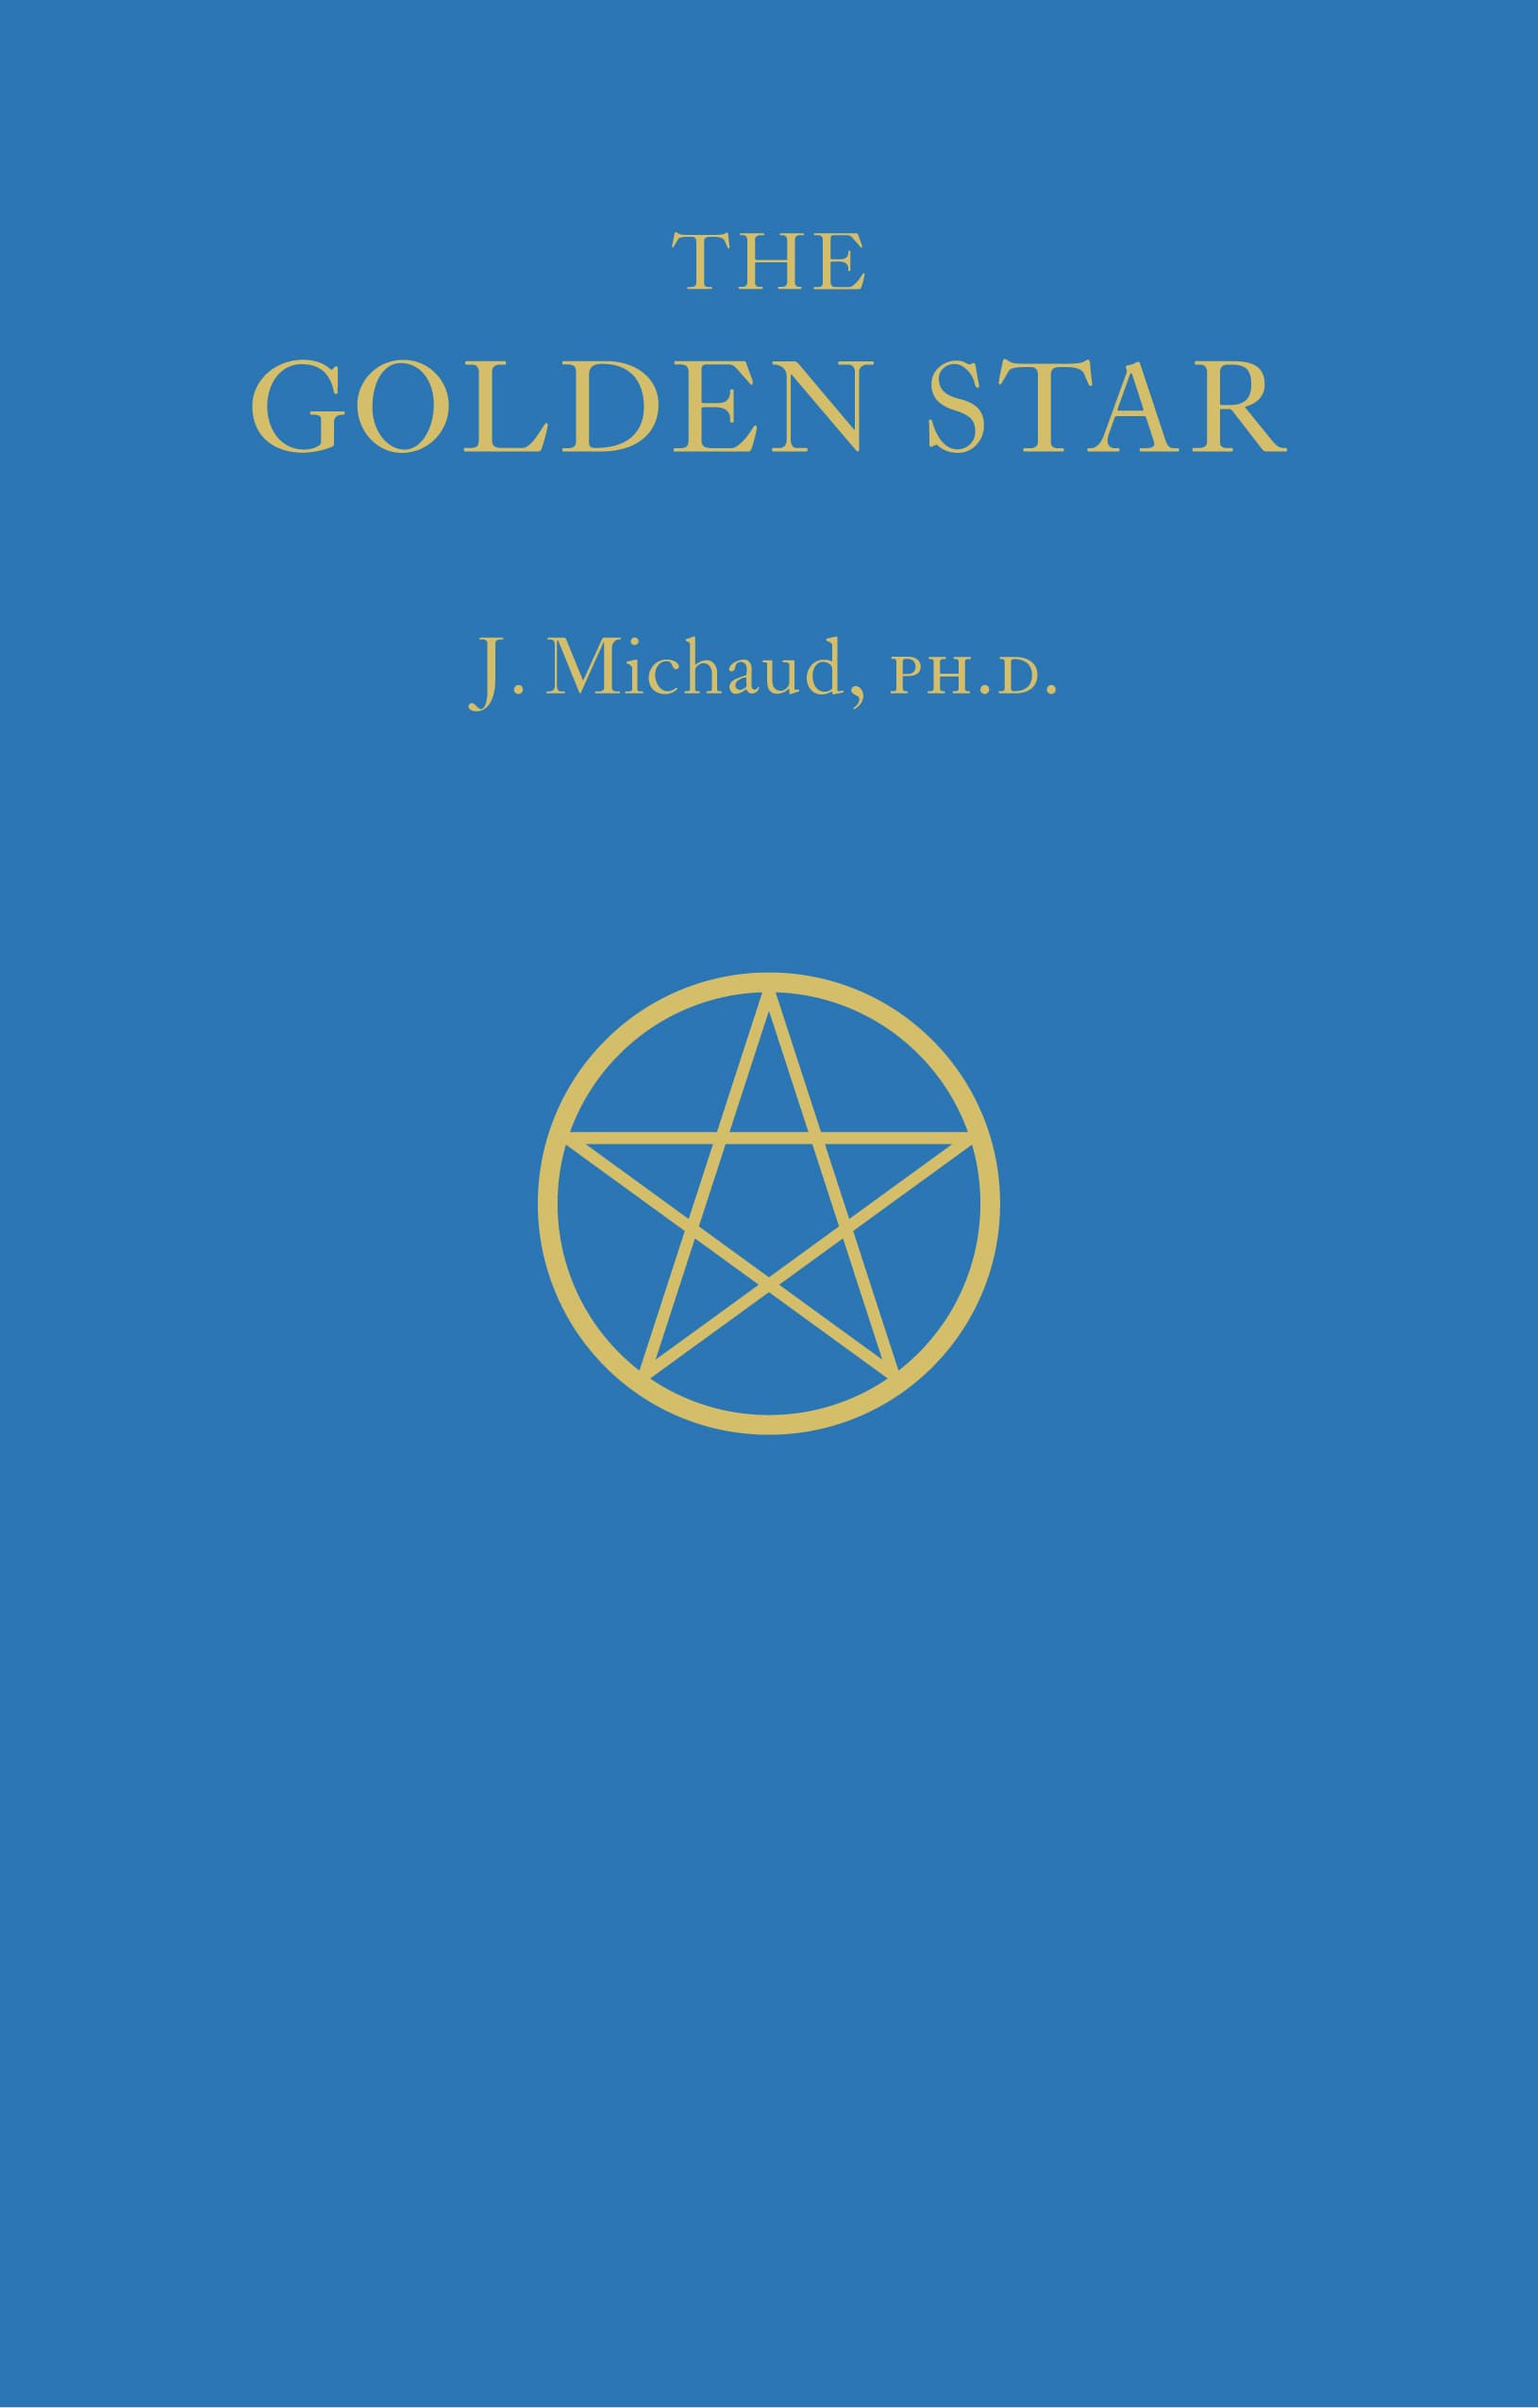 Cover of The Golden Star: A Mystic Crescendo in Twelve Visions, A Book for Initiates. by J. Michaud, Ph.D.; contains a central golden pentagram below title.